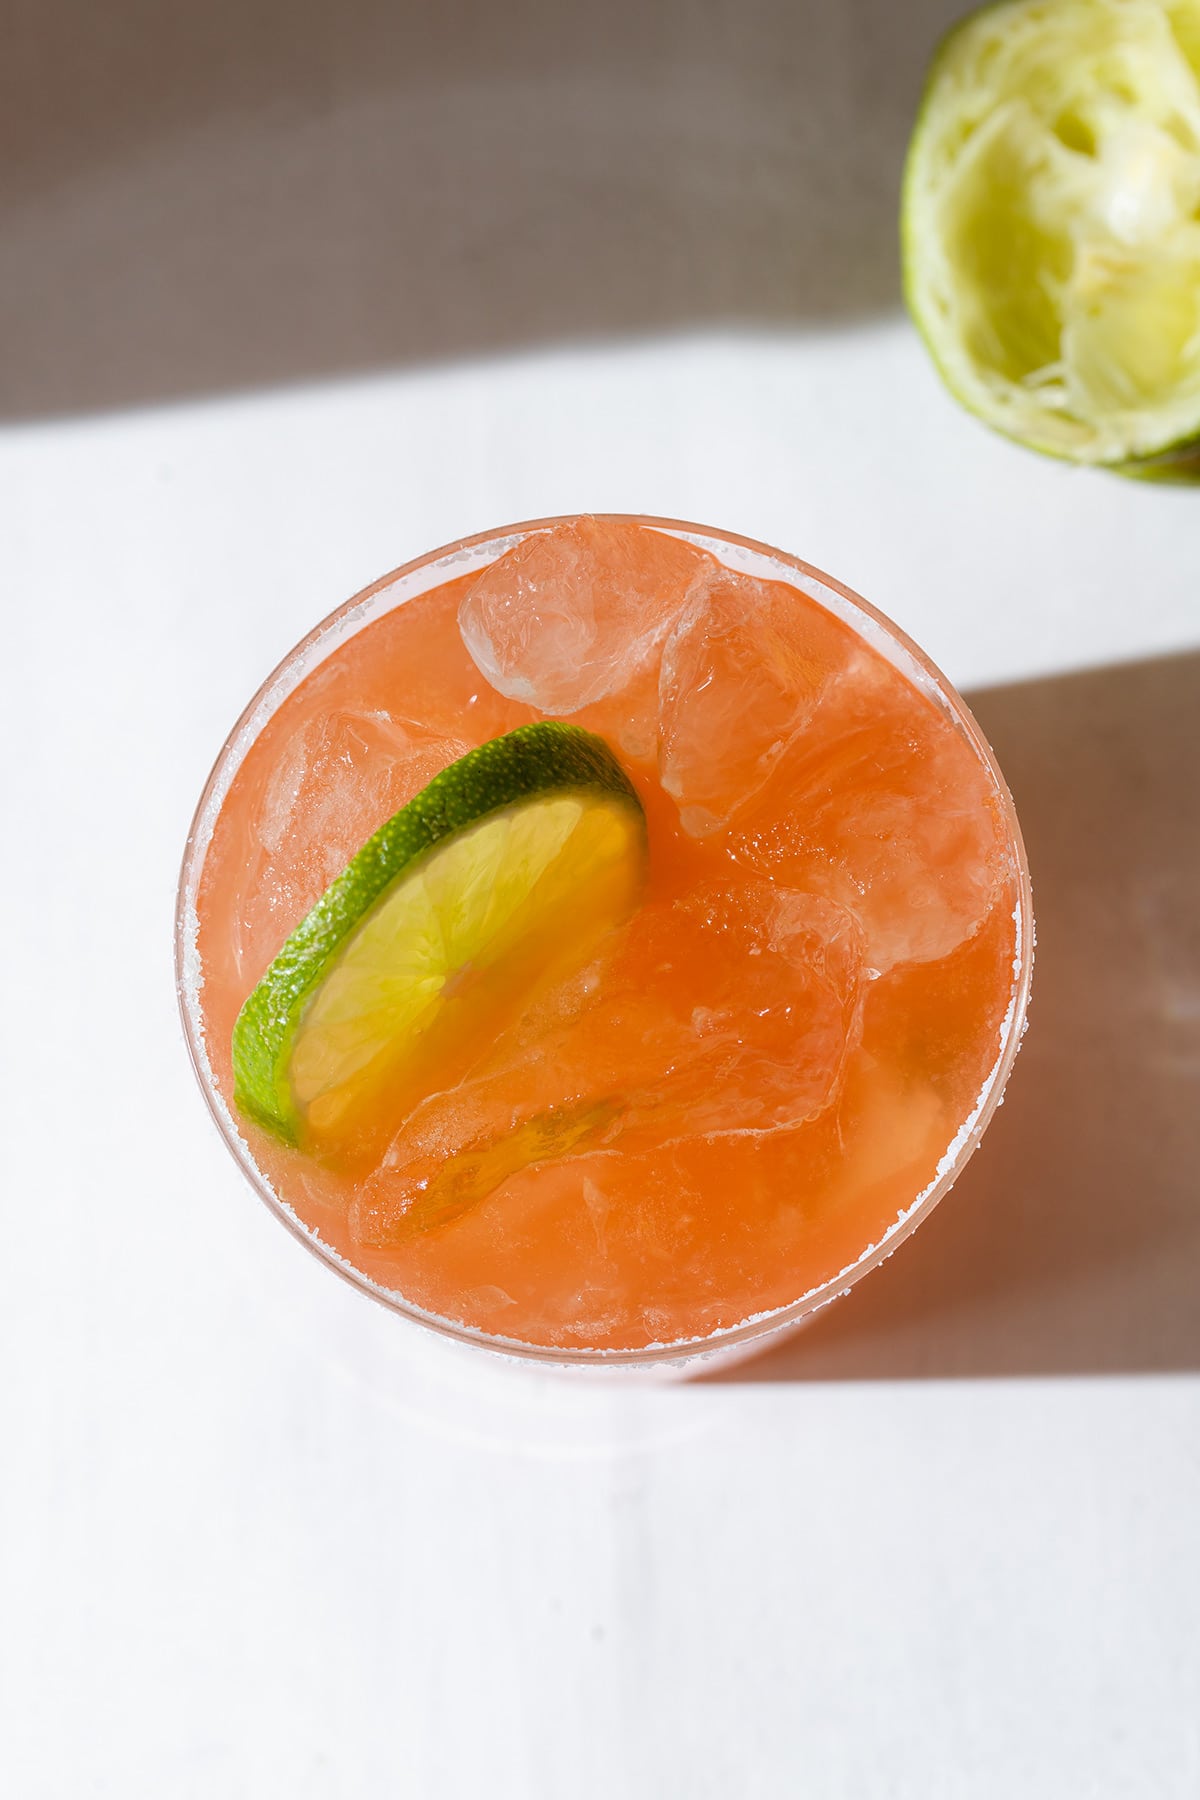 Orange drink in a short glass filled with ice garnished with a lime slice.